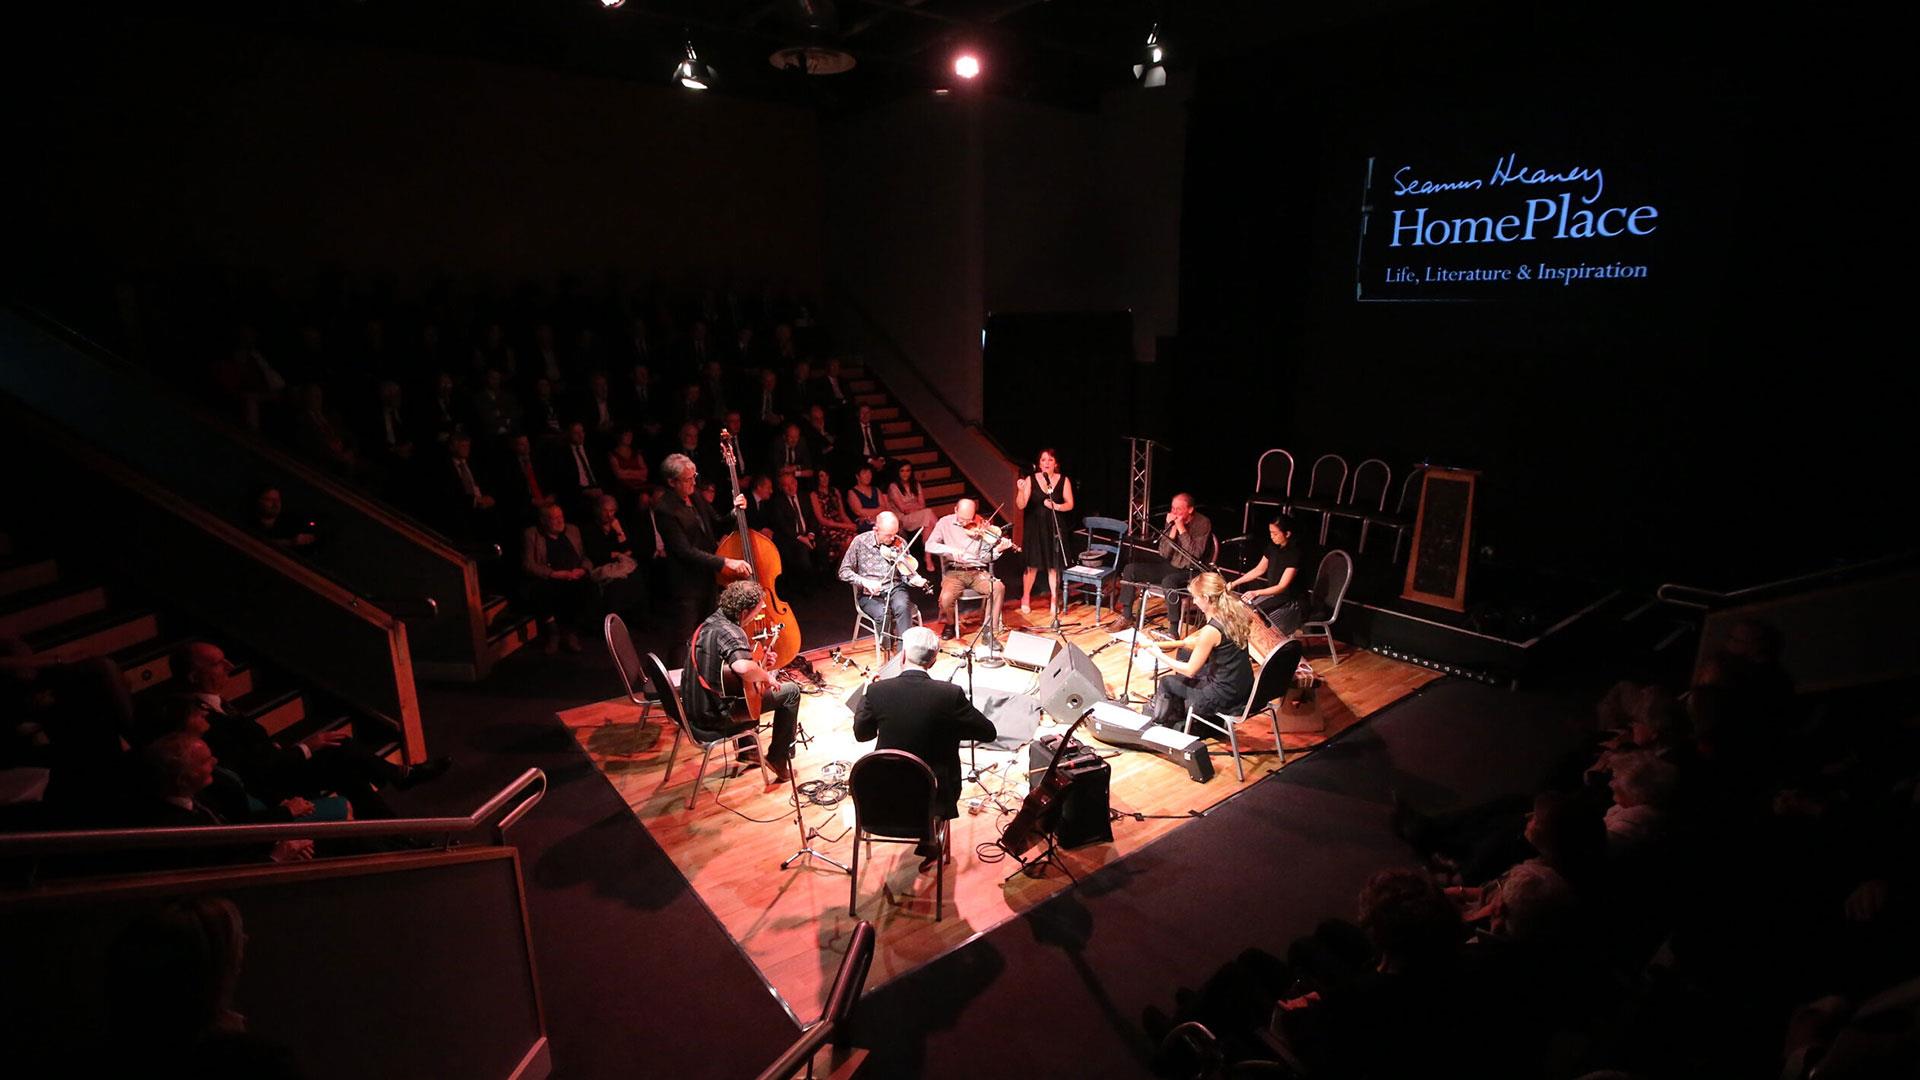 A group of musicians in the Helicon performance space at Seamus Heaney HomePlace